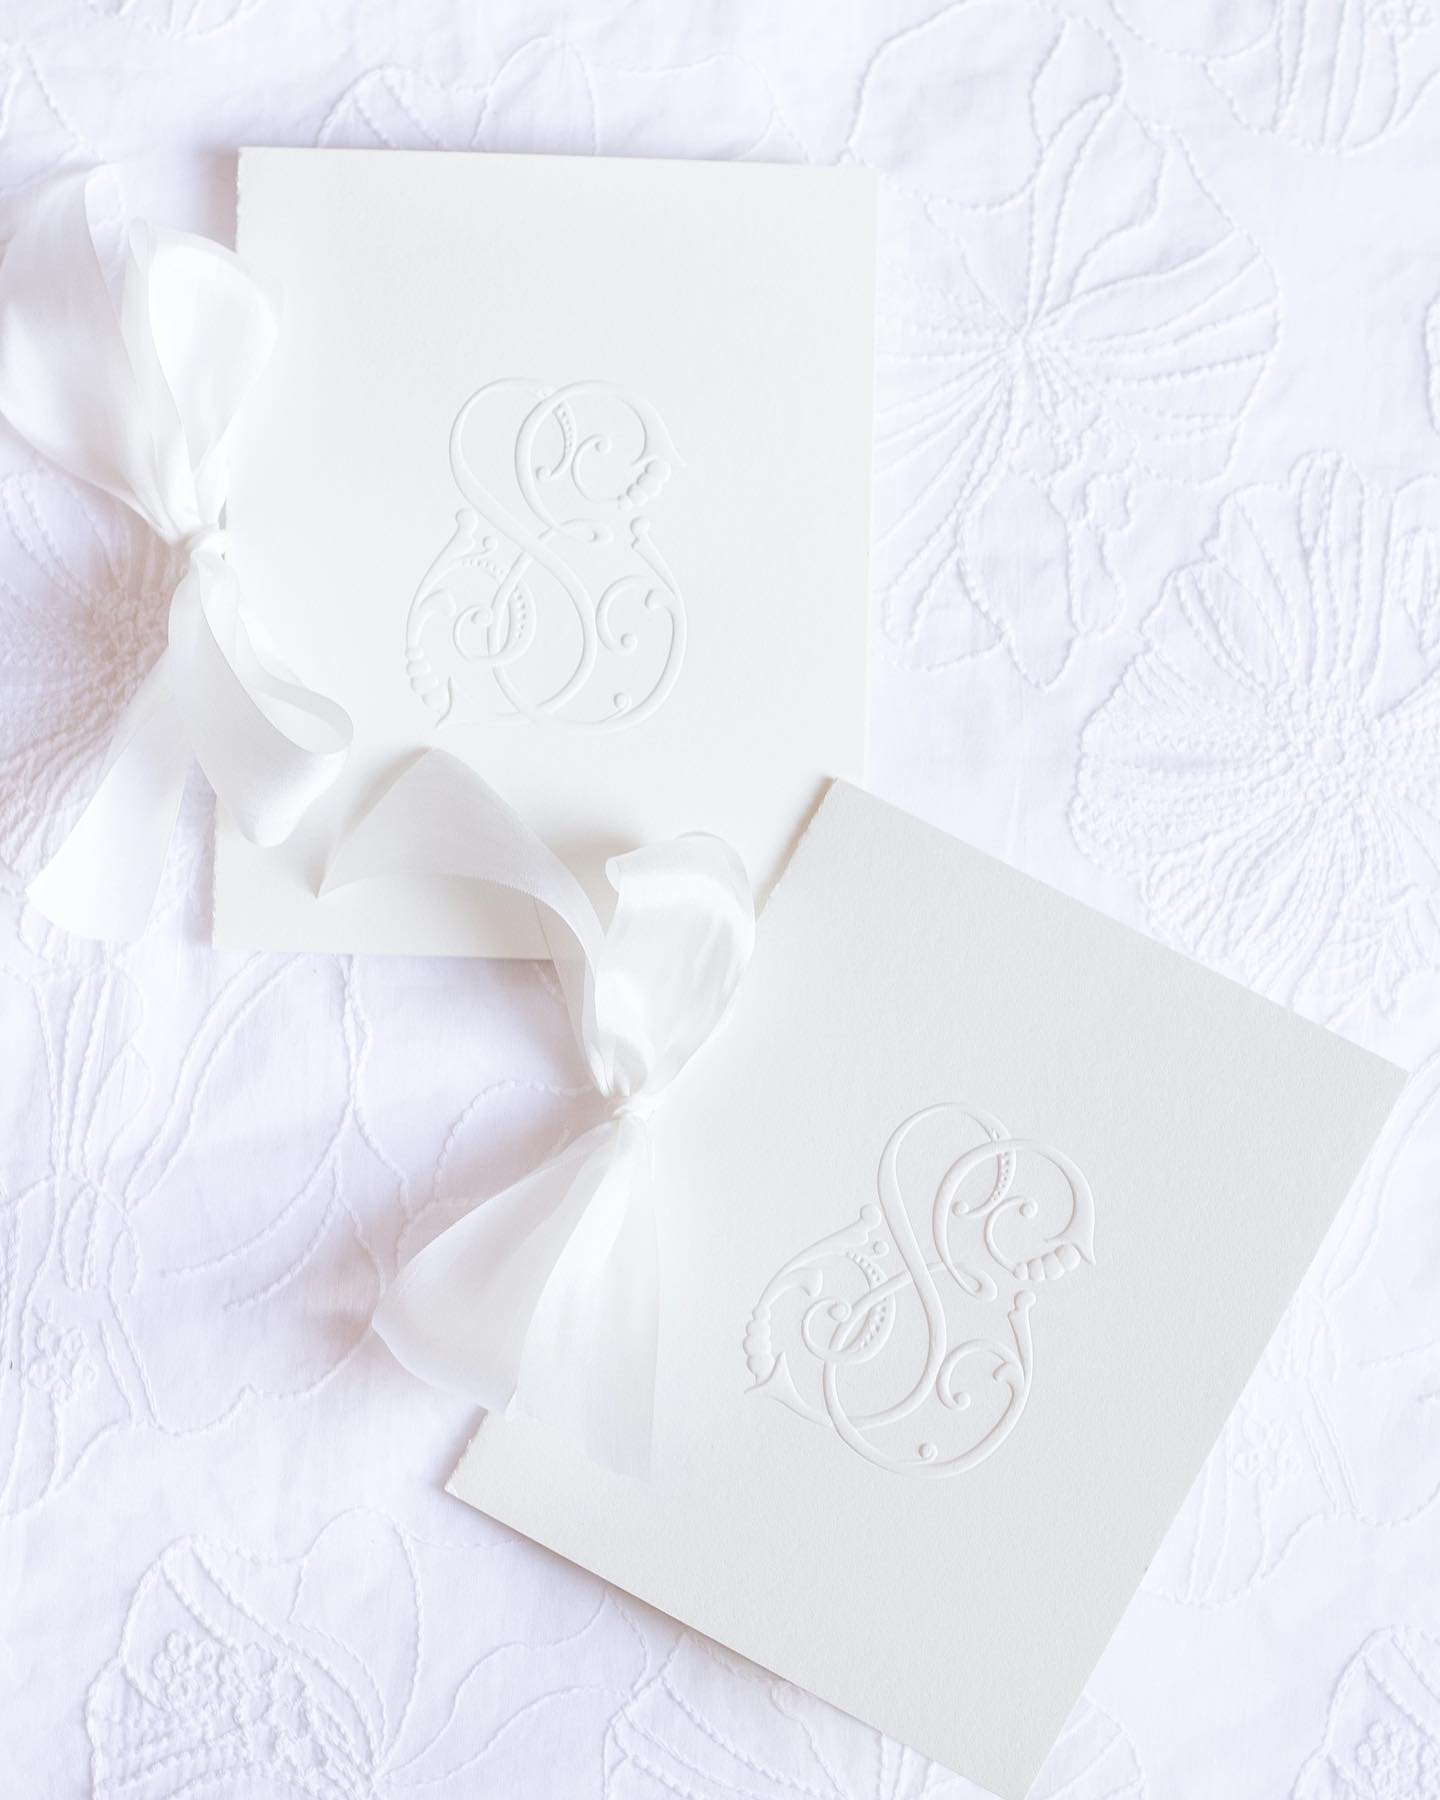 You can never go wrong with a classic white program booklet for your wedding ceremony! This program features the bride and grooms&rsquo; multi sculpt, embossed custom monogram and assembled together with a white silk ribbon for a subtle, yet elegant 